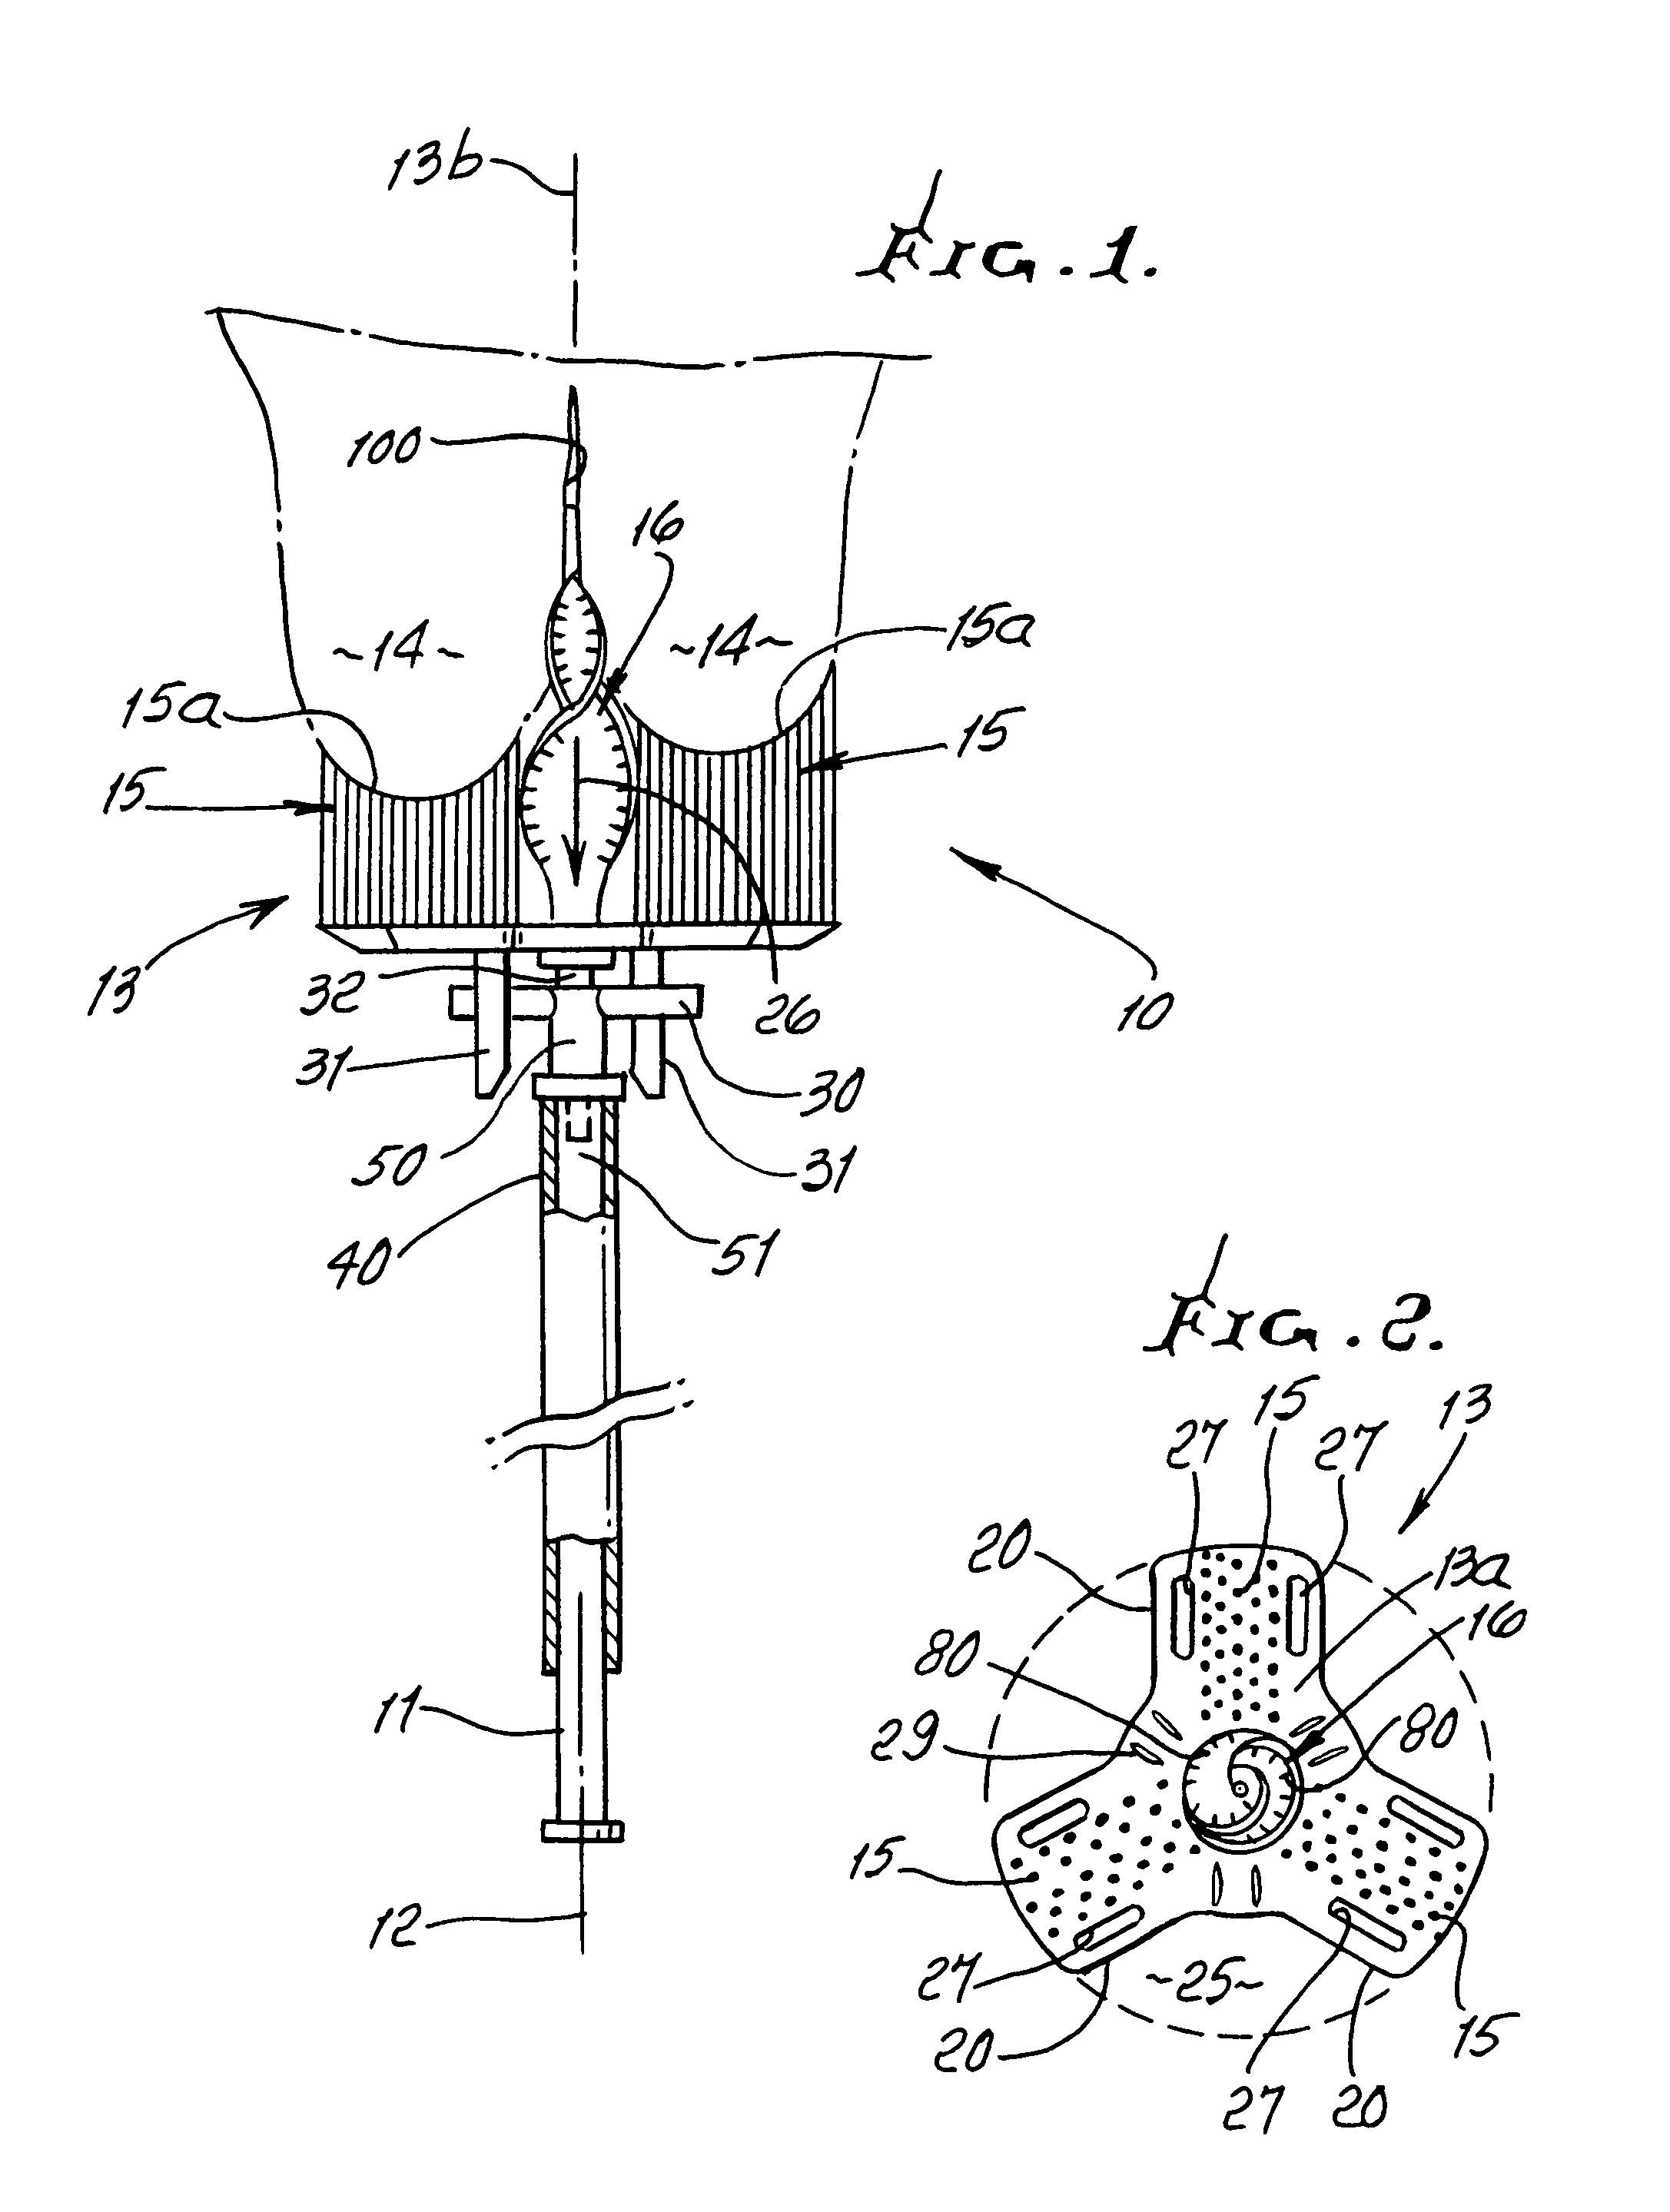 Rotary device to gather mucous for testing